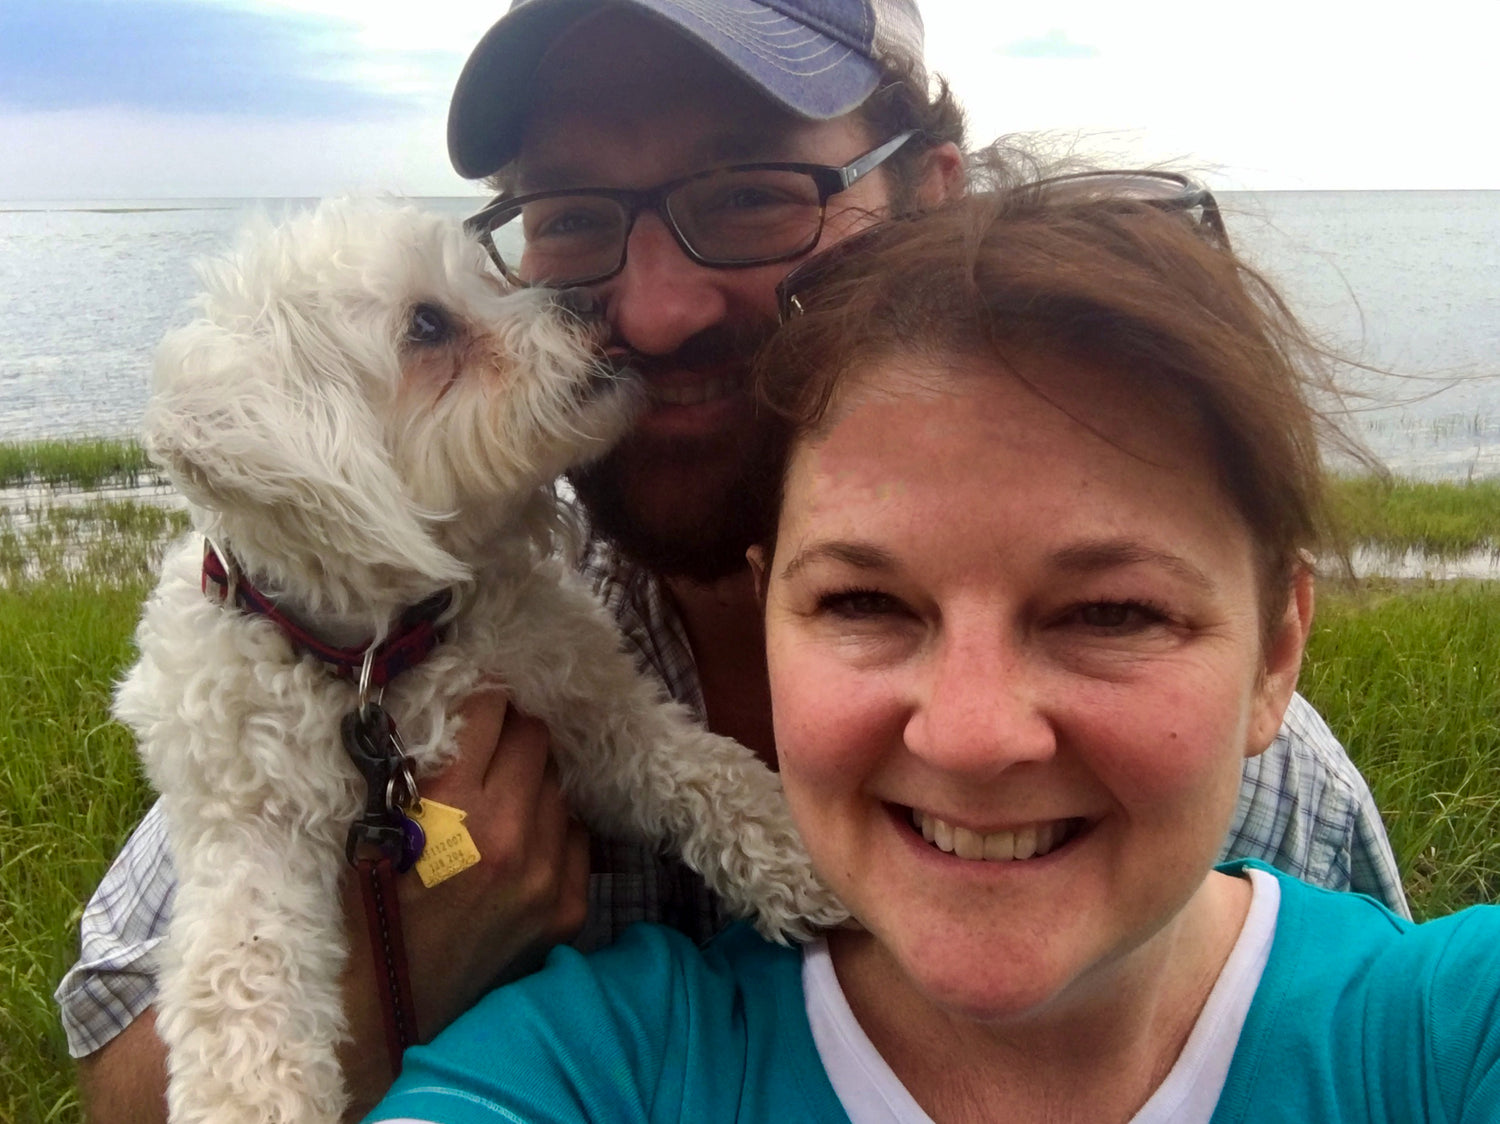 eastern shore va, eastern shore maryland, maltipoo, hiking, candle, women business owner